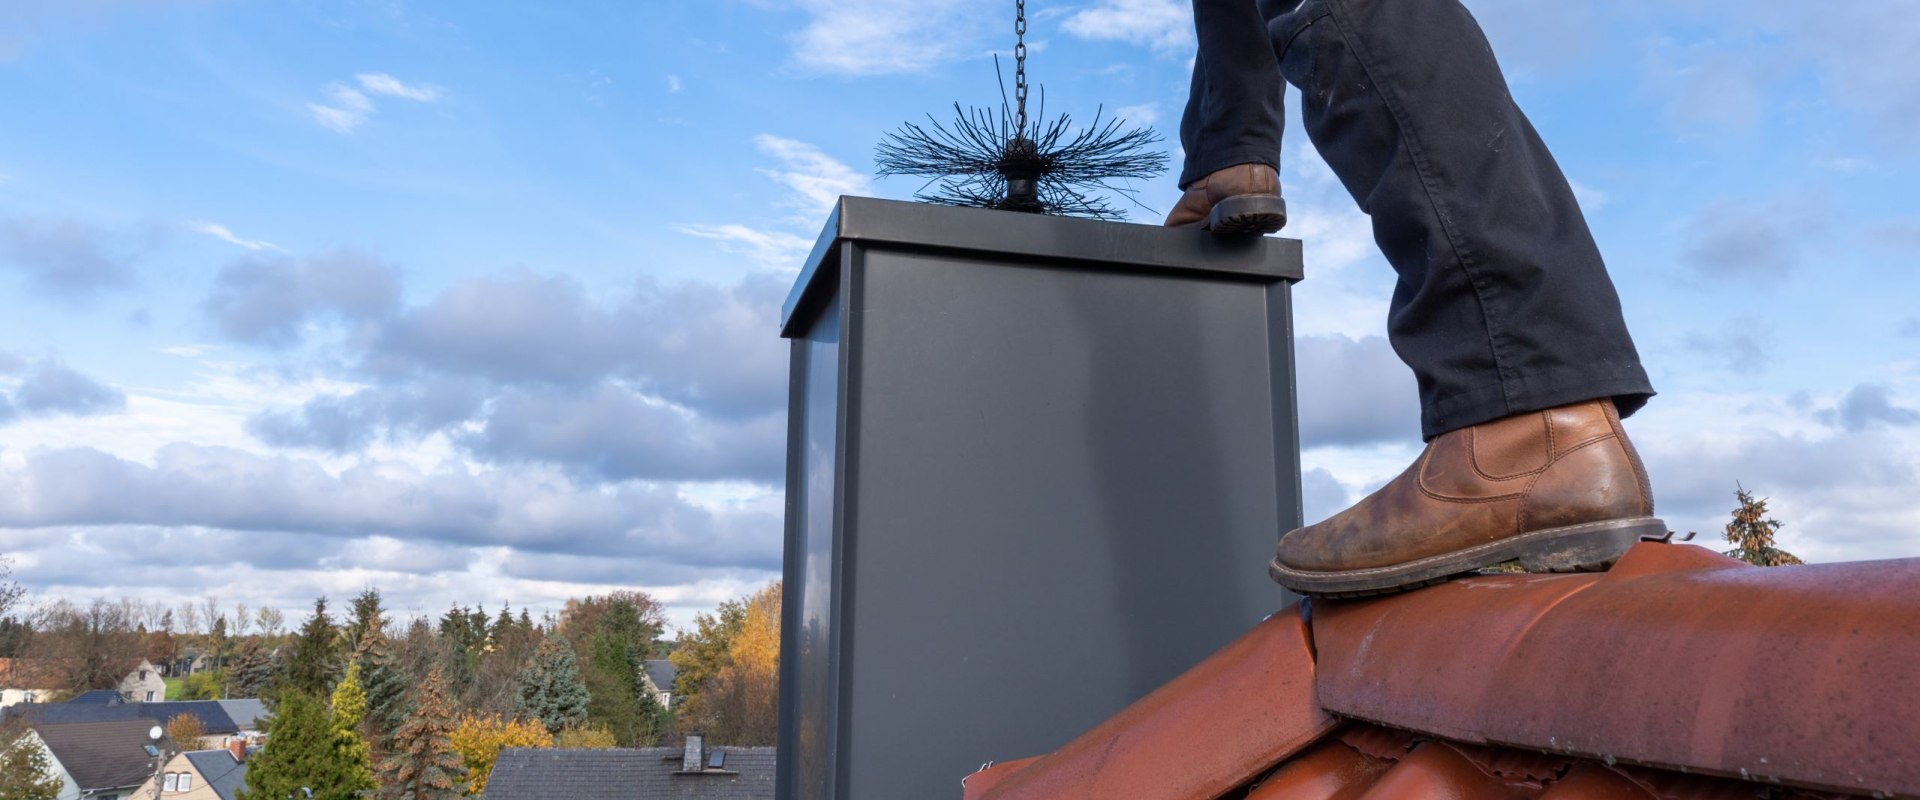 Sweeping the Flue: The Importance of Regular Chimney Maintenance